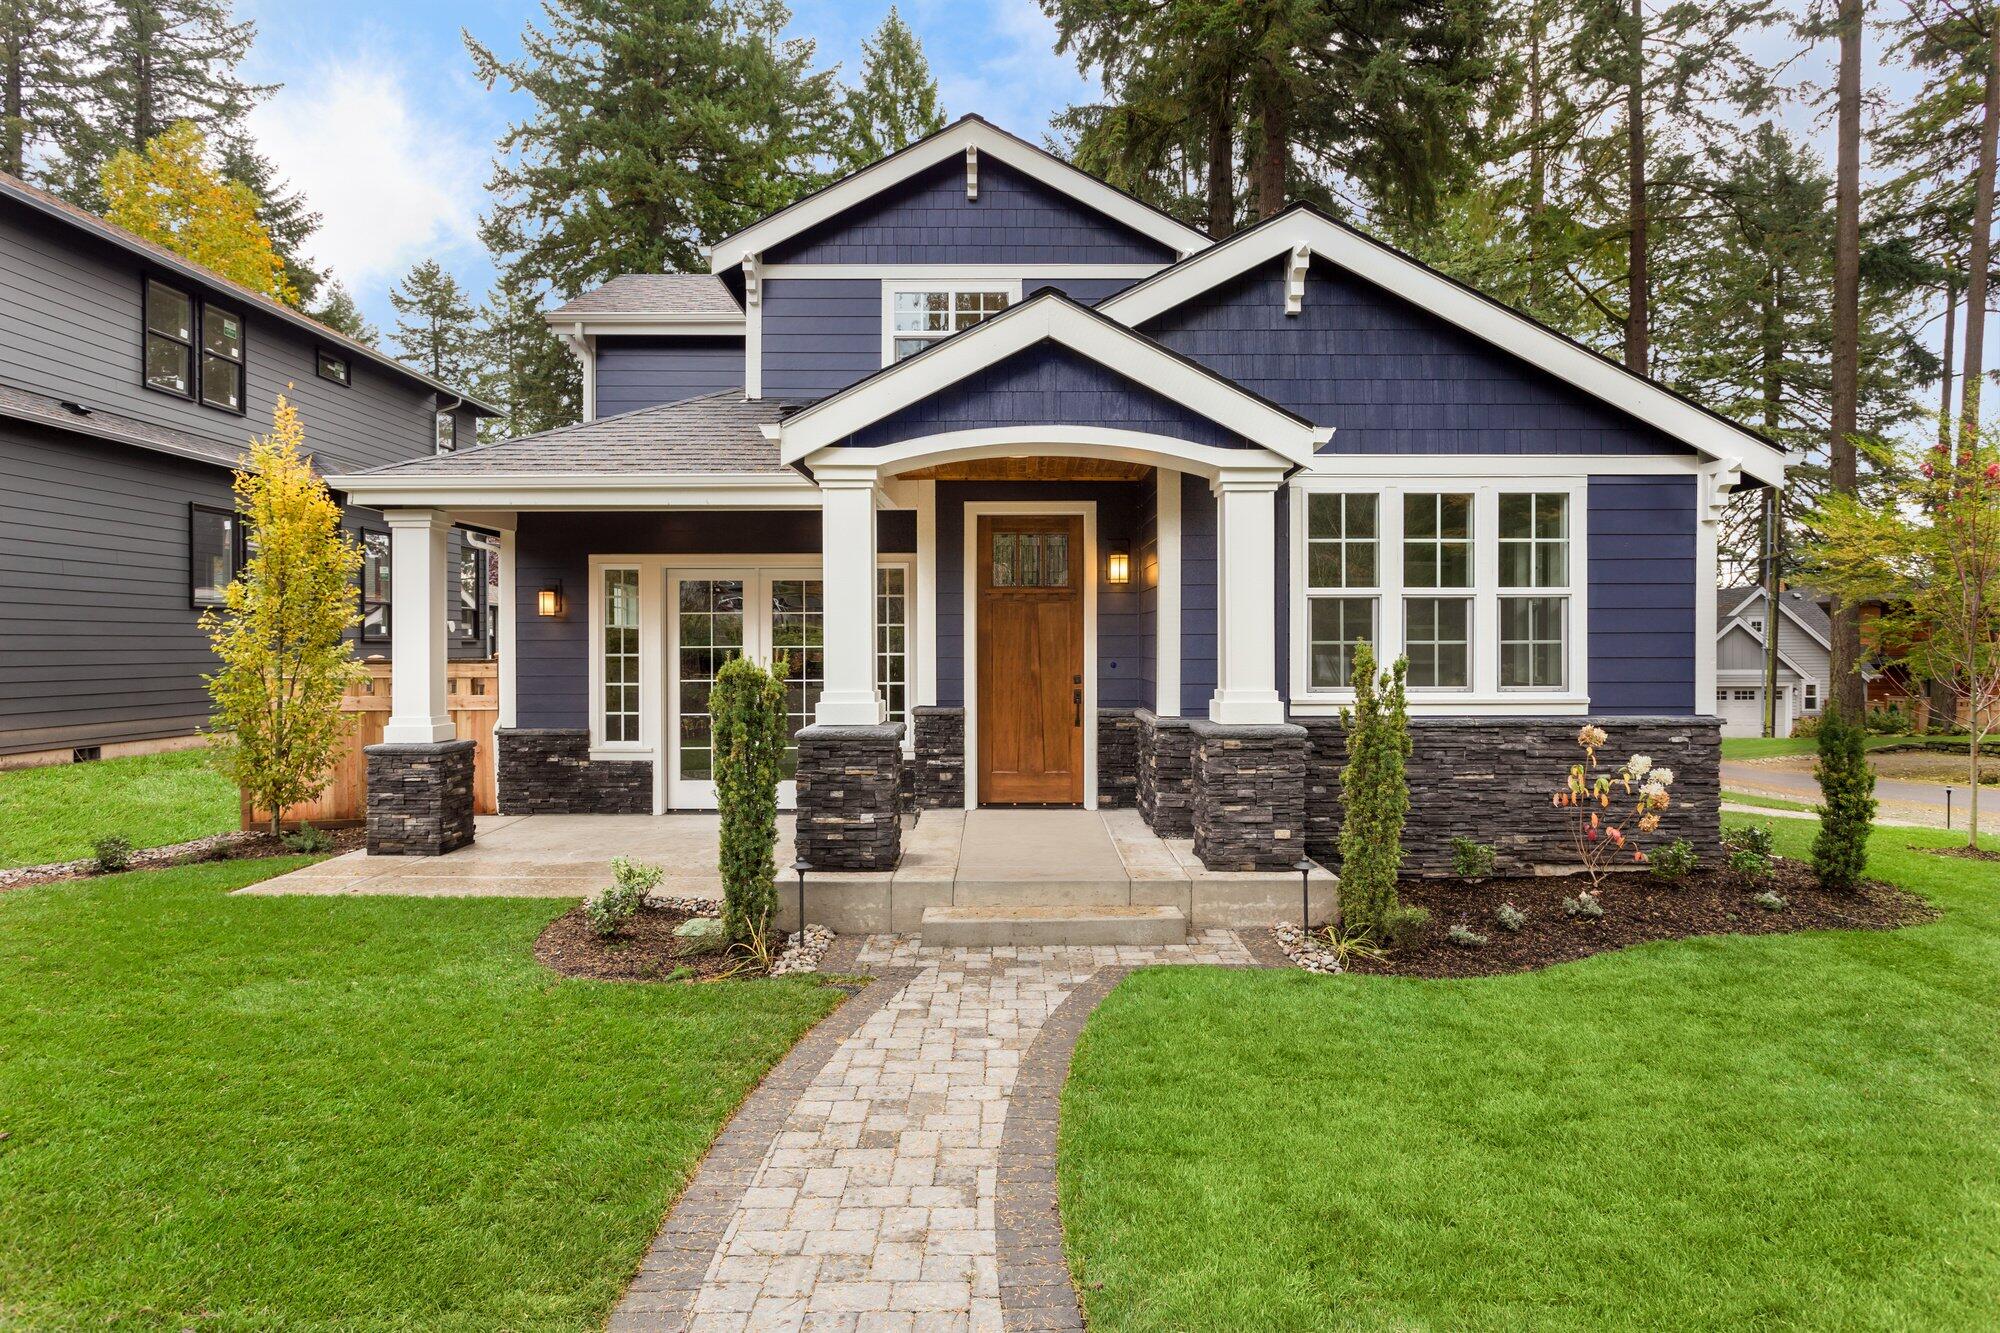 What Are the Benefits of Buying New Construction Homes?